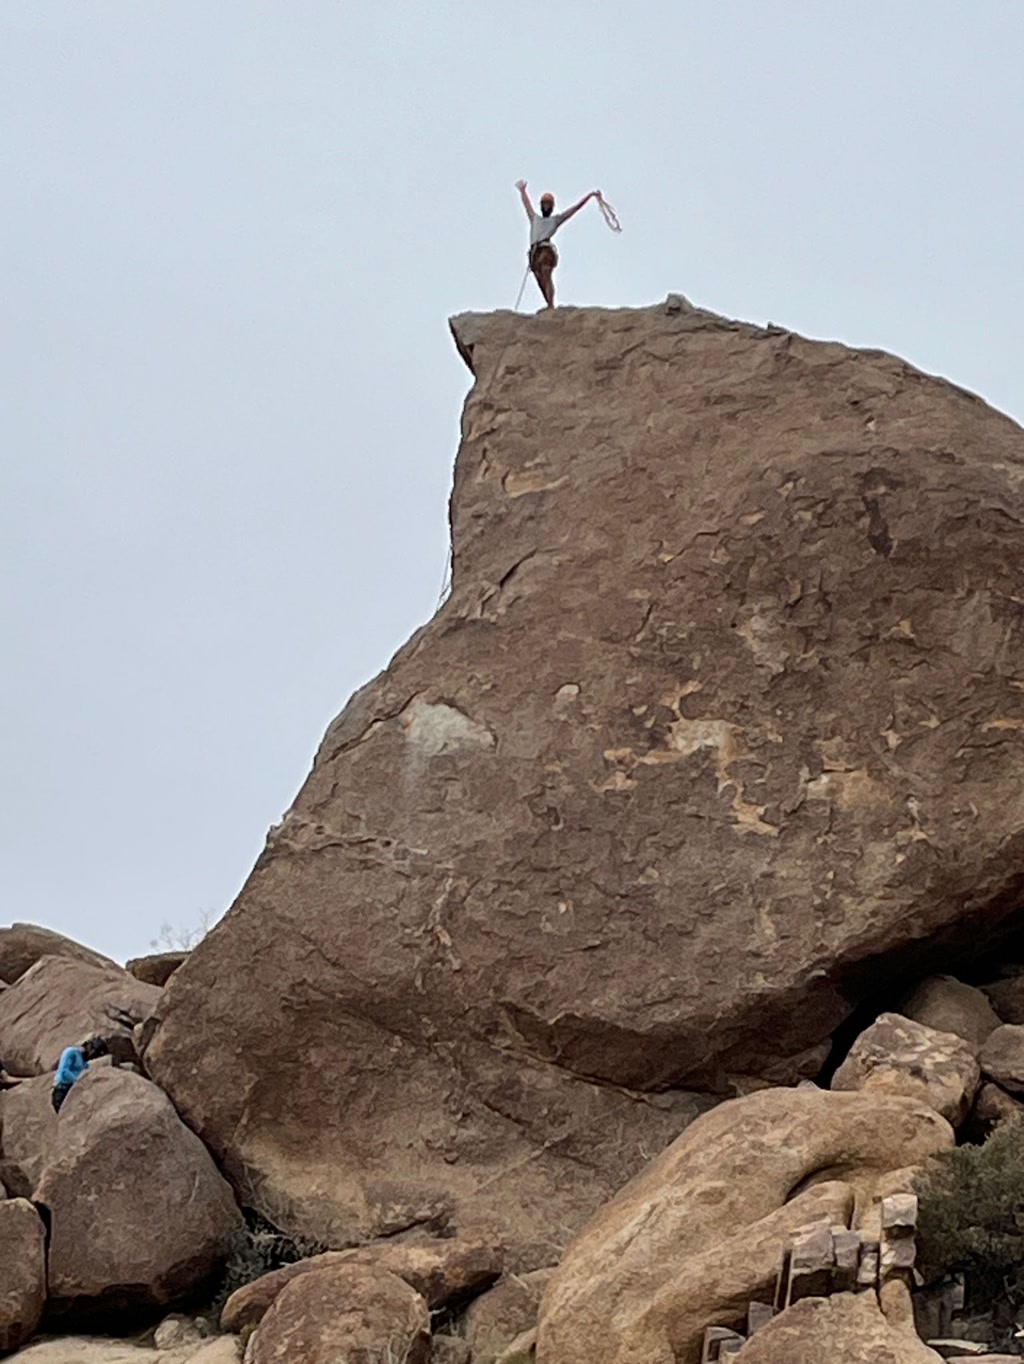 A person stands triumphantly on top of a large, smooth rock formation that resembles an elf's hat, set against a hazy sky. They appear to be celebrating their climb with a victory pose, arms raised high holding a loop of rope. Another individual is seen near the bottom left of the rock, dressed in blue, looking up towards the person at the summit.